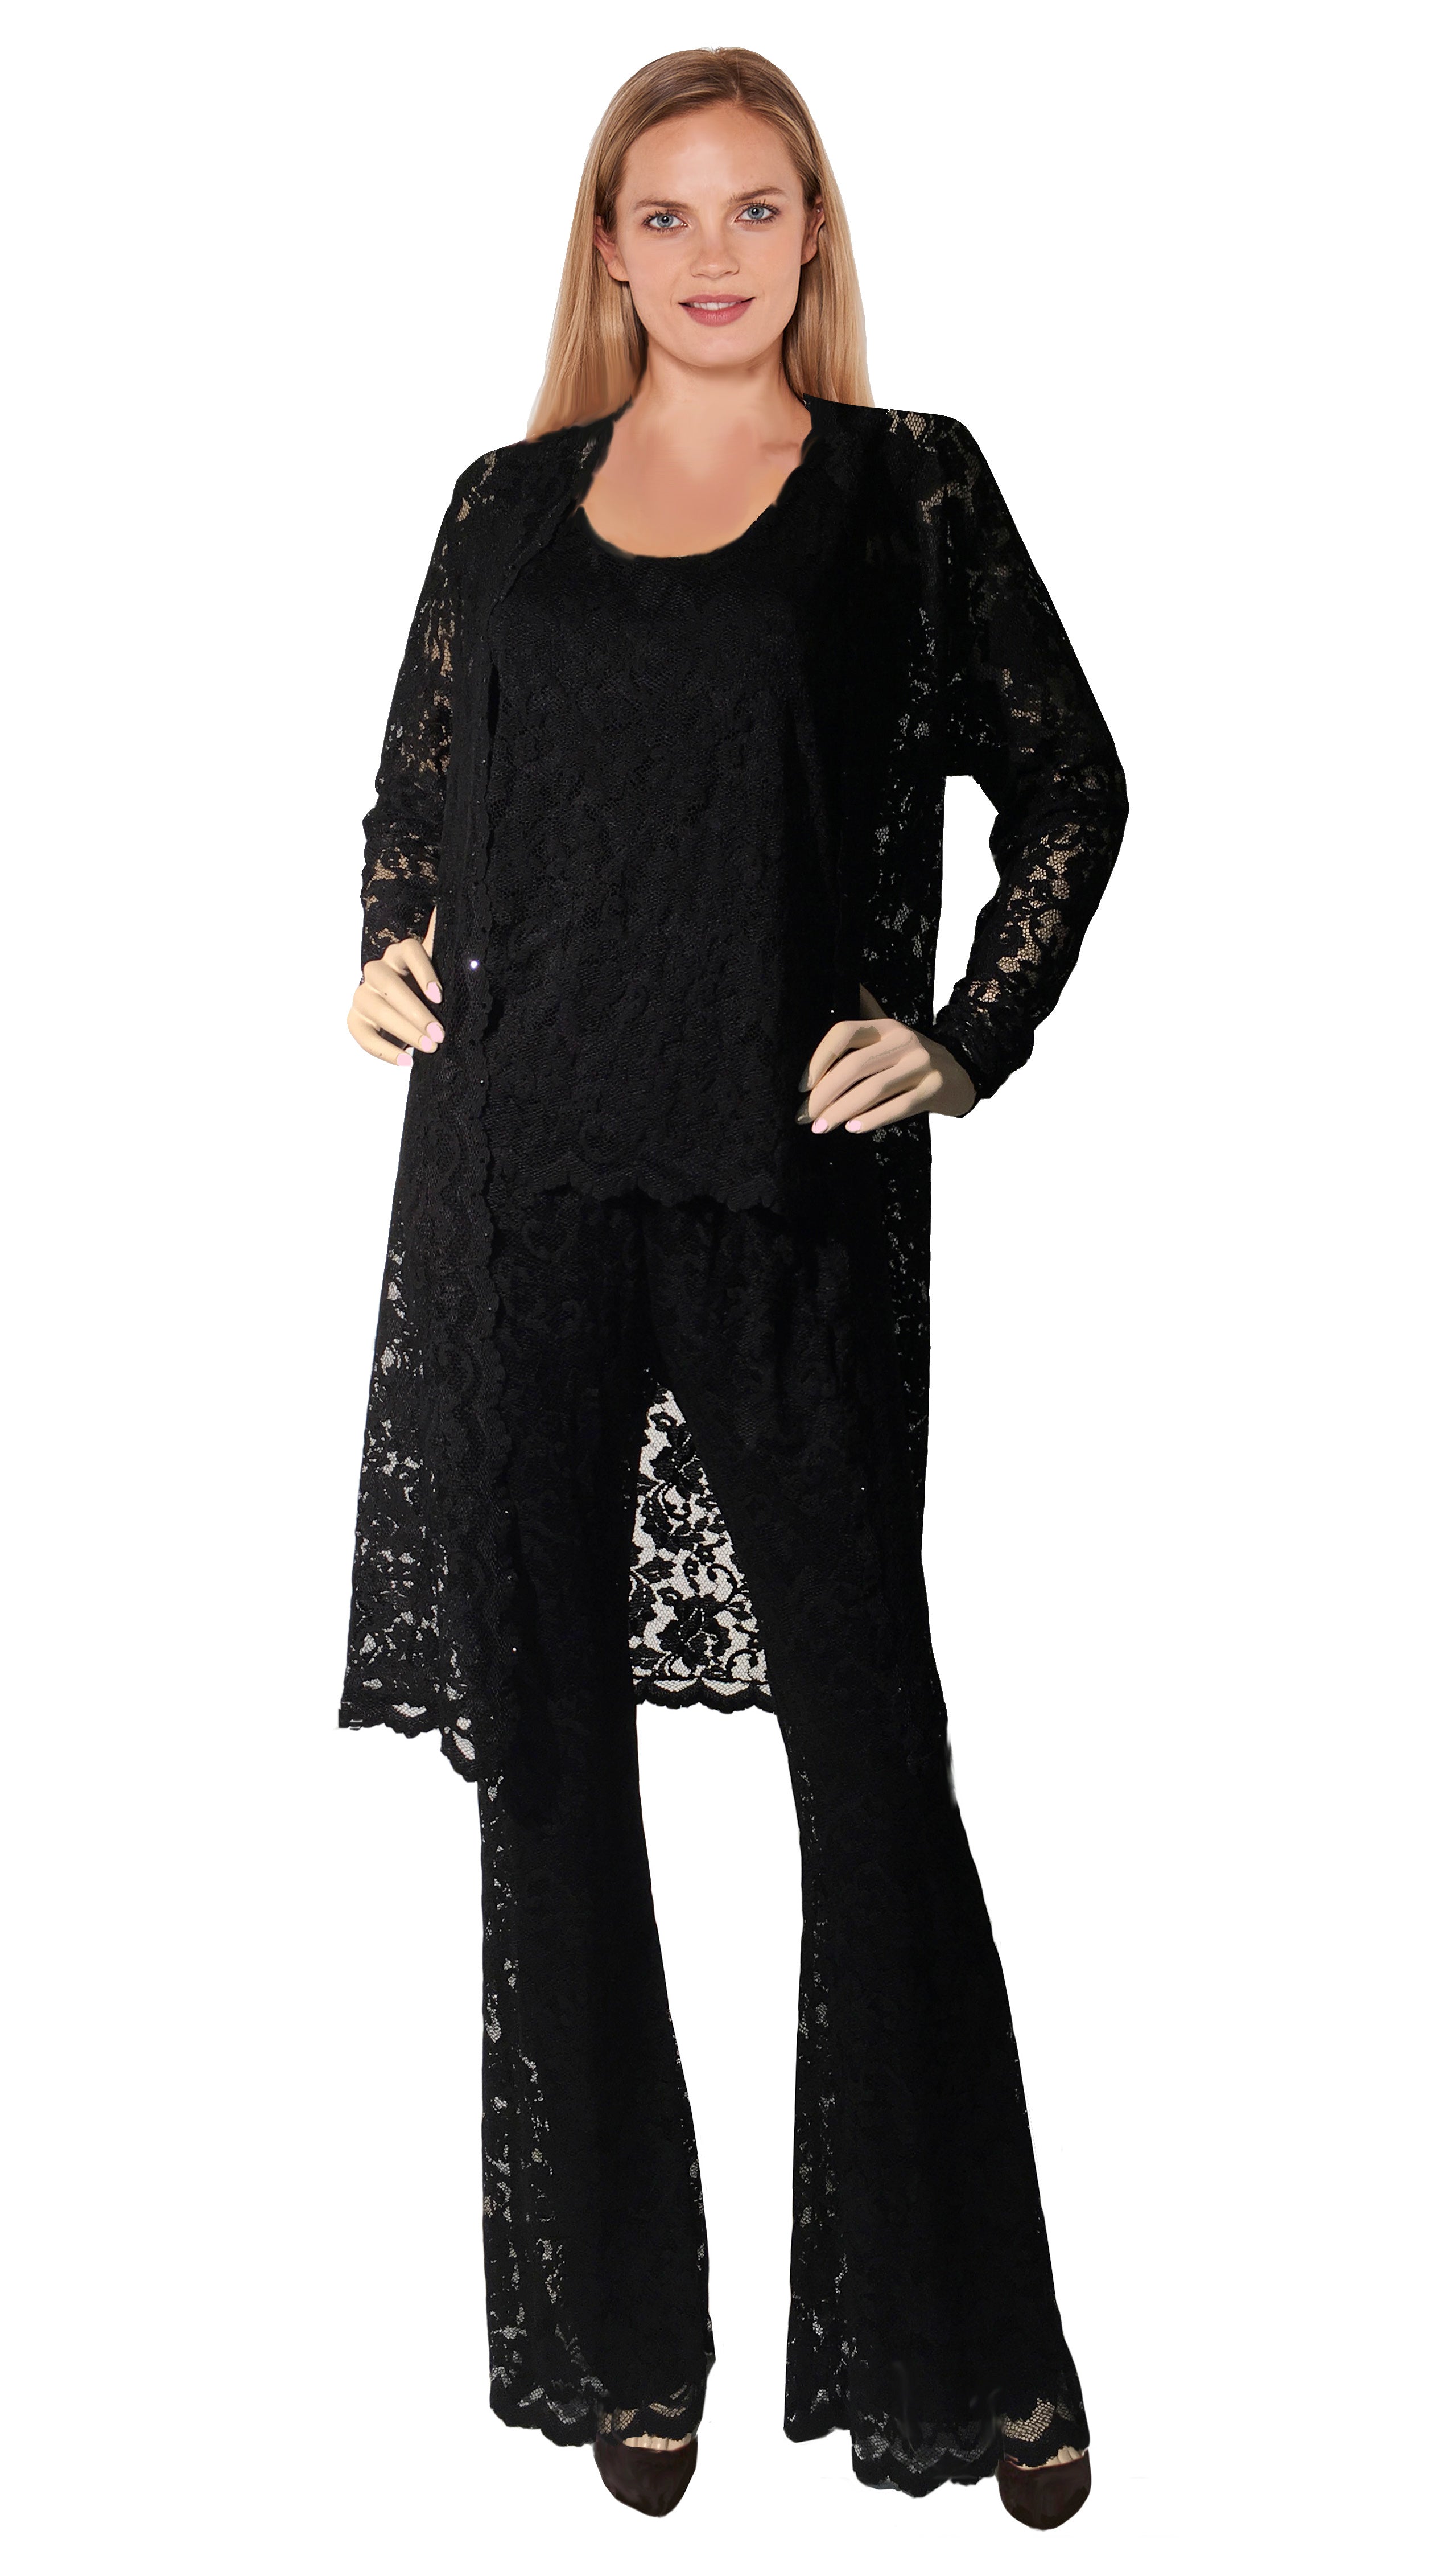 French Rose Lace Duster Jacket with Scoop Neck Cami & Bell Pant - Sara Mique Evening Wear